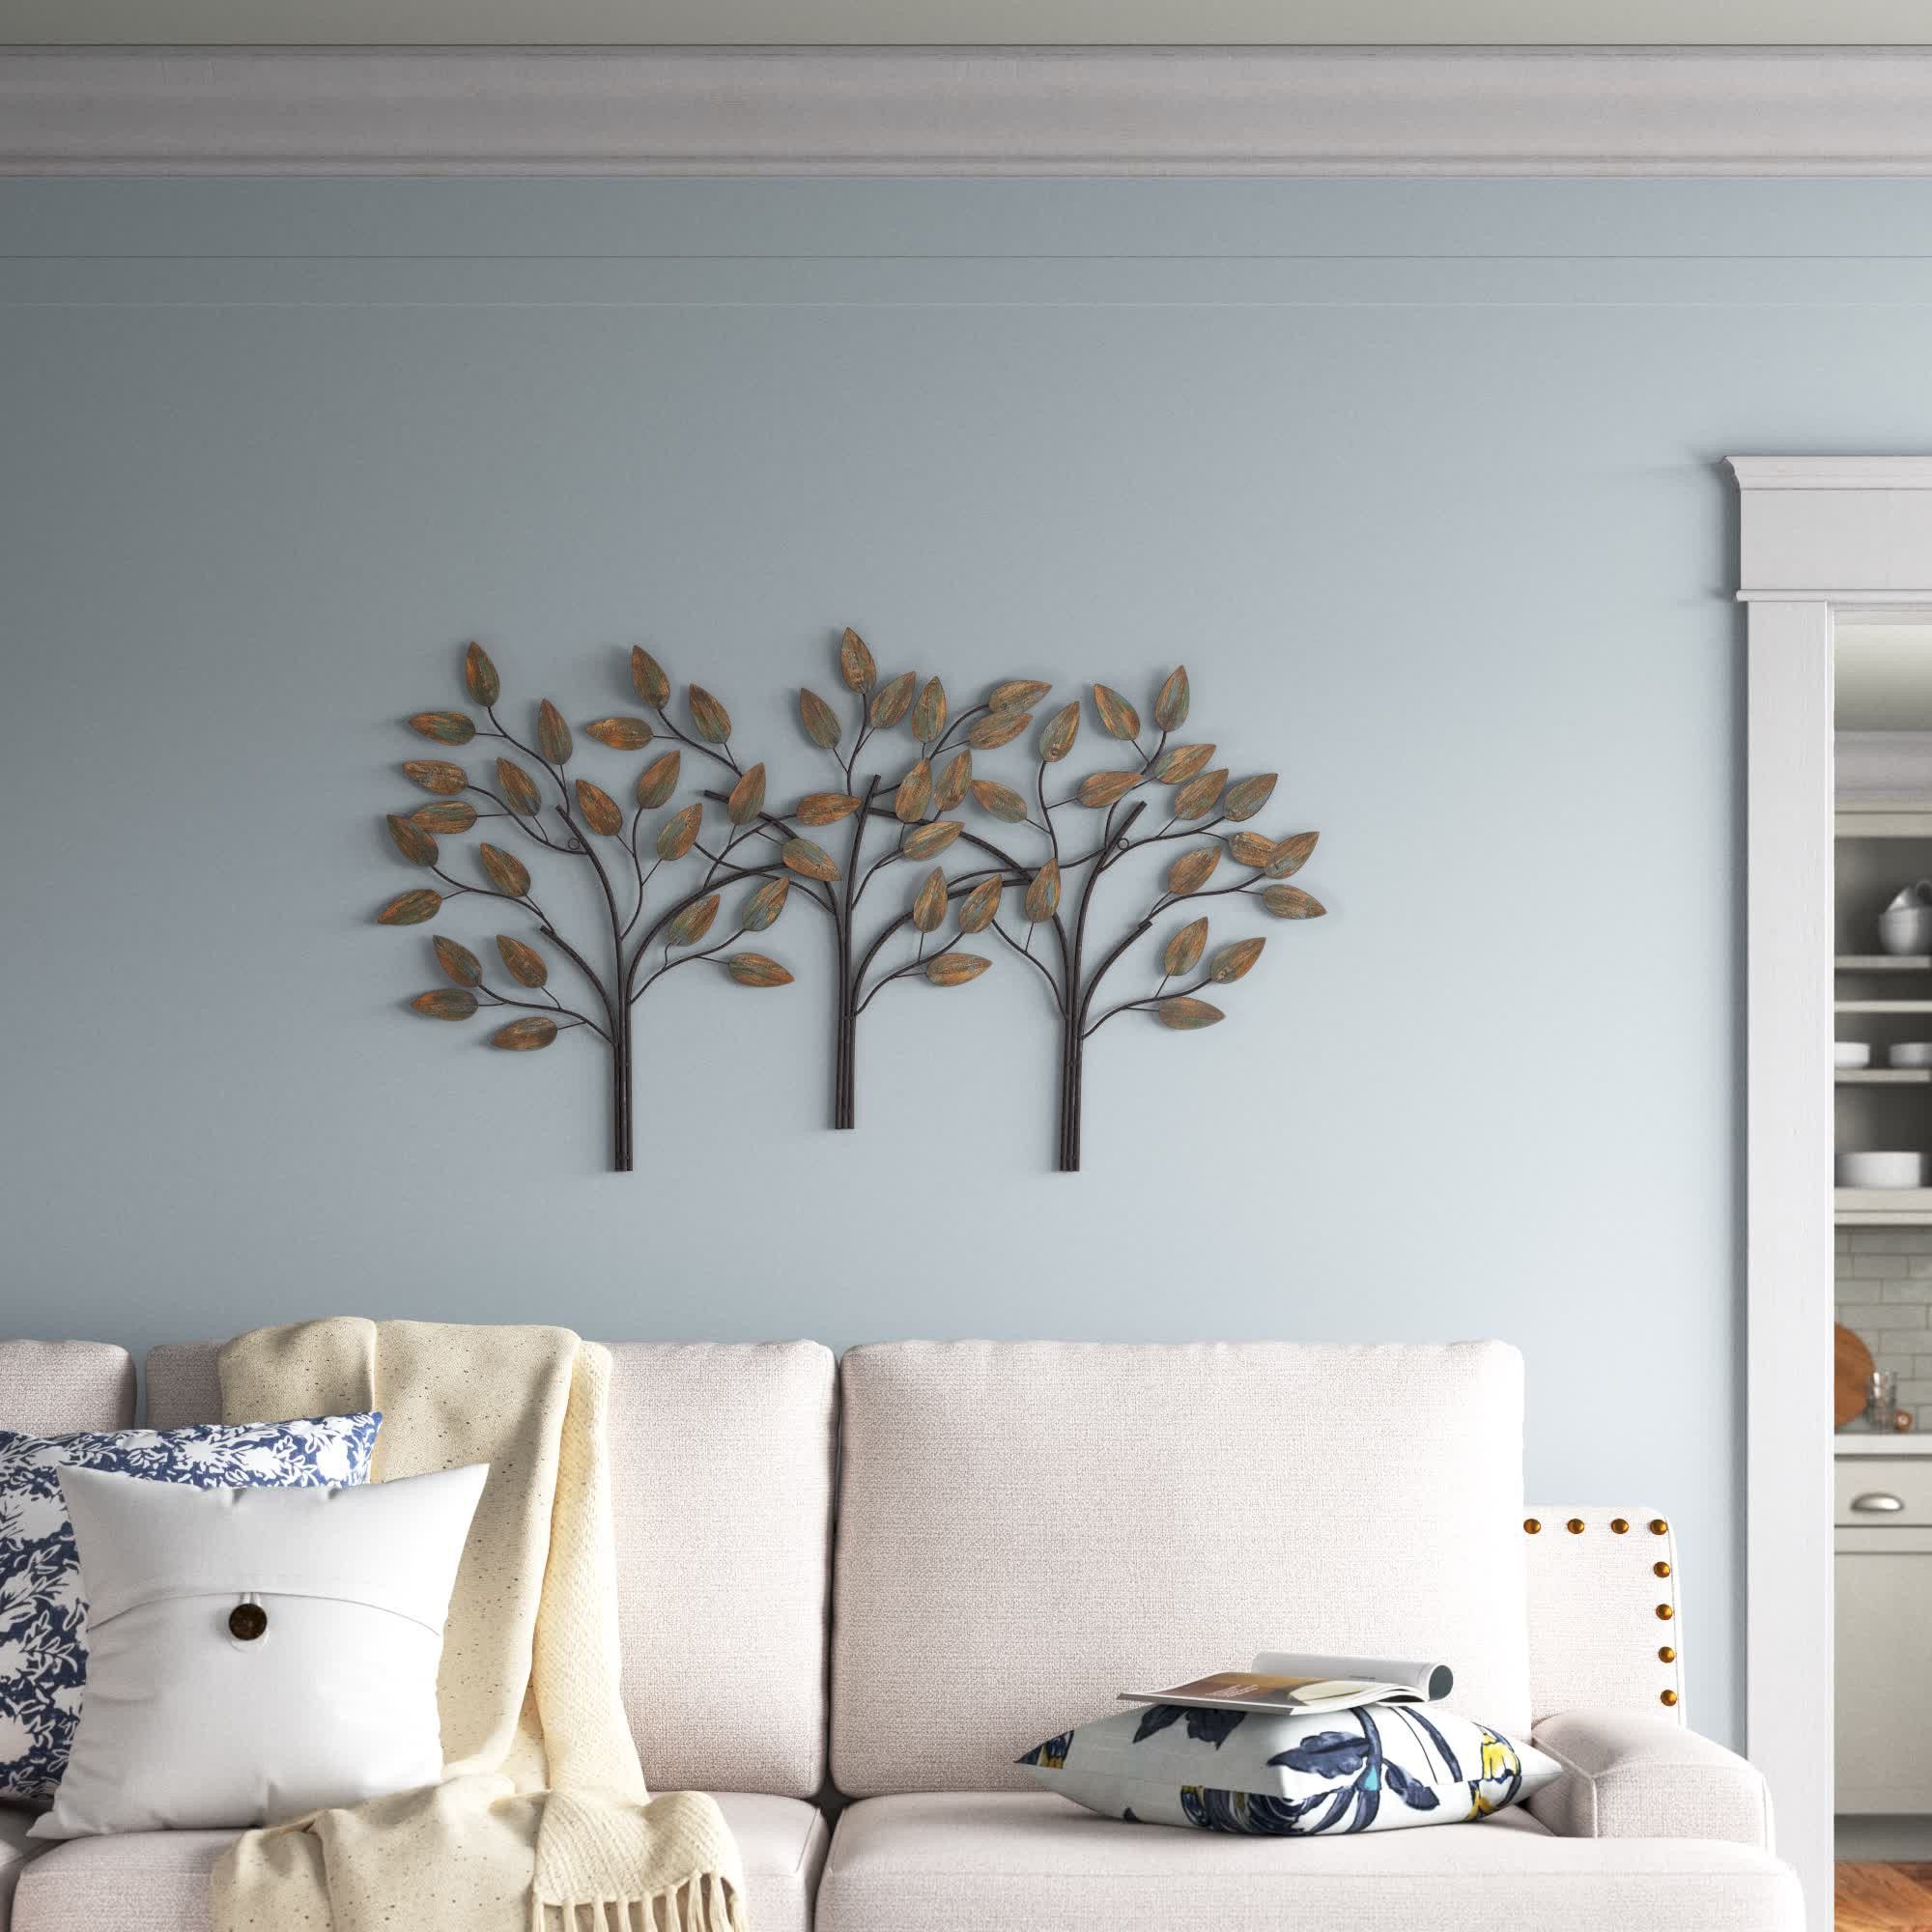 Andover Mills™ Desford Leaf Wall Décor & Reviews | Wayfair Intended For Inspired Wall Art (View 8 of 15)